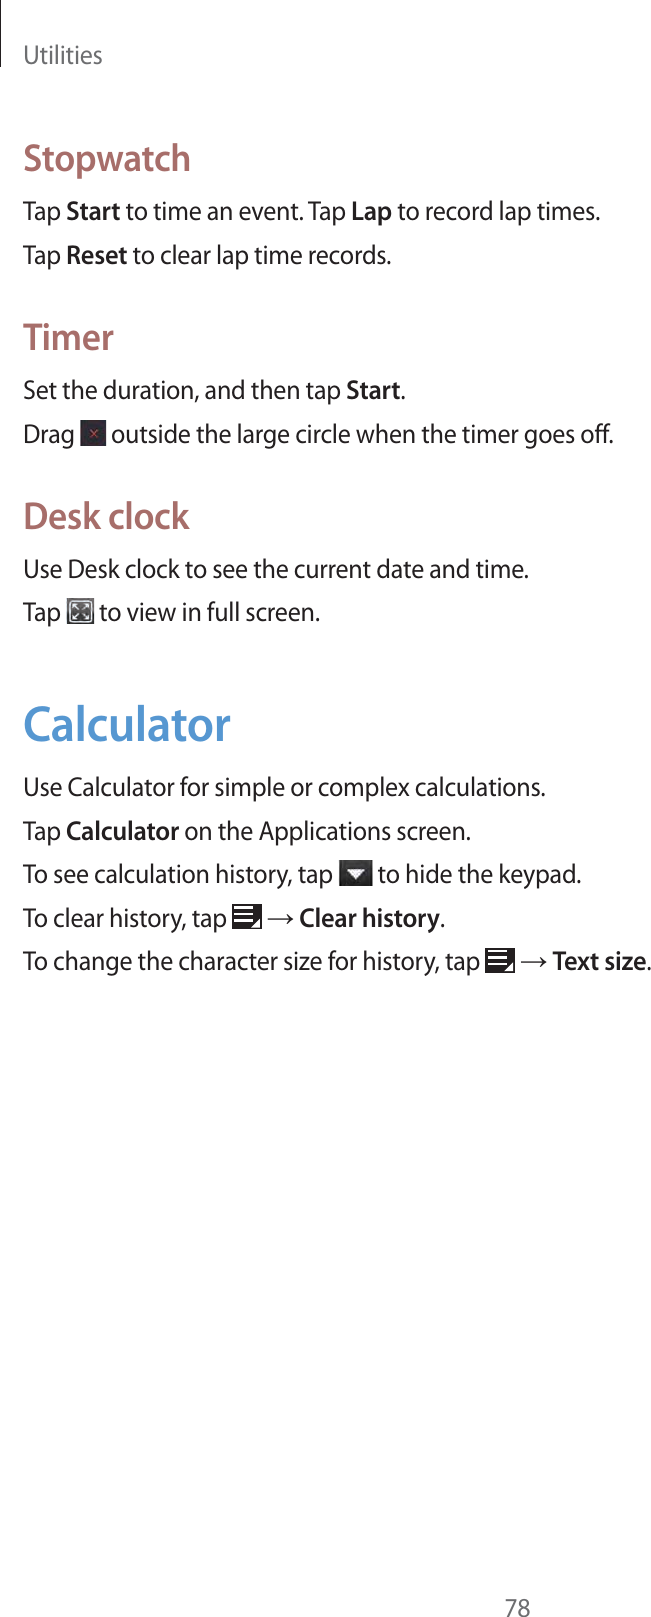 Utilities78StopwatchTap Start to time an event. Tap Lap to record lap times.Tap Reset to clear lap time records.TimerSet the duration, and then tap Start.Drag   outside the large circle when the timer goes off.Desk clockUse Desk clock to see the current date and time.Tap   to view in full screen.CalculatorUse Calculator for simple or complex calculations.Tap Calculator on the Applications screen.To see calculation history, tap   to hide the keypad. To clear history, tap   ĺ Clear history.To change the character size for history, tap   ĺ Text size.